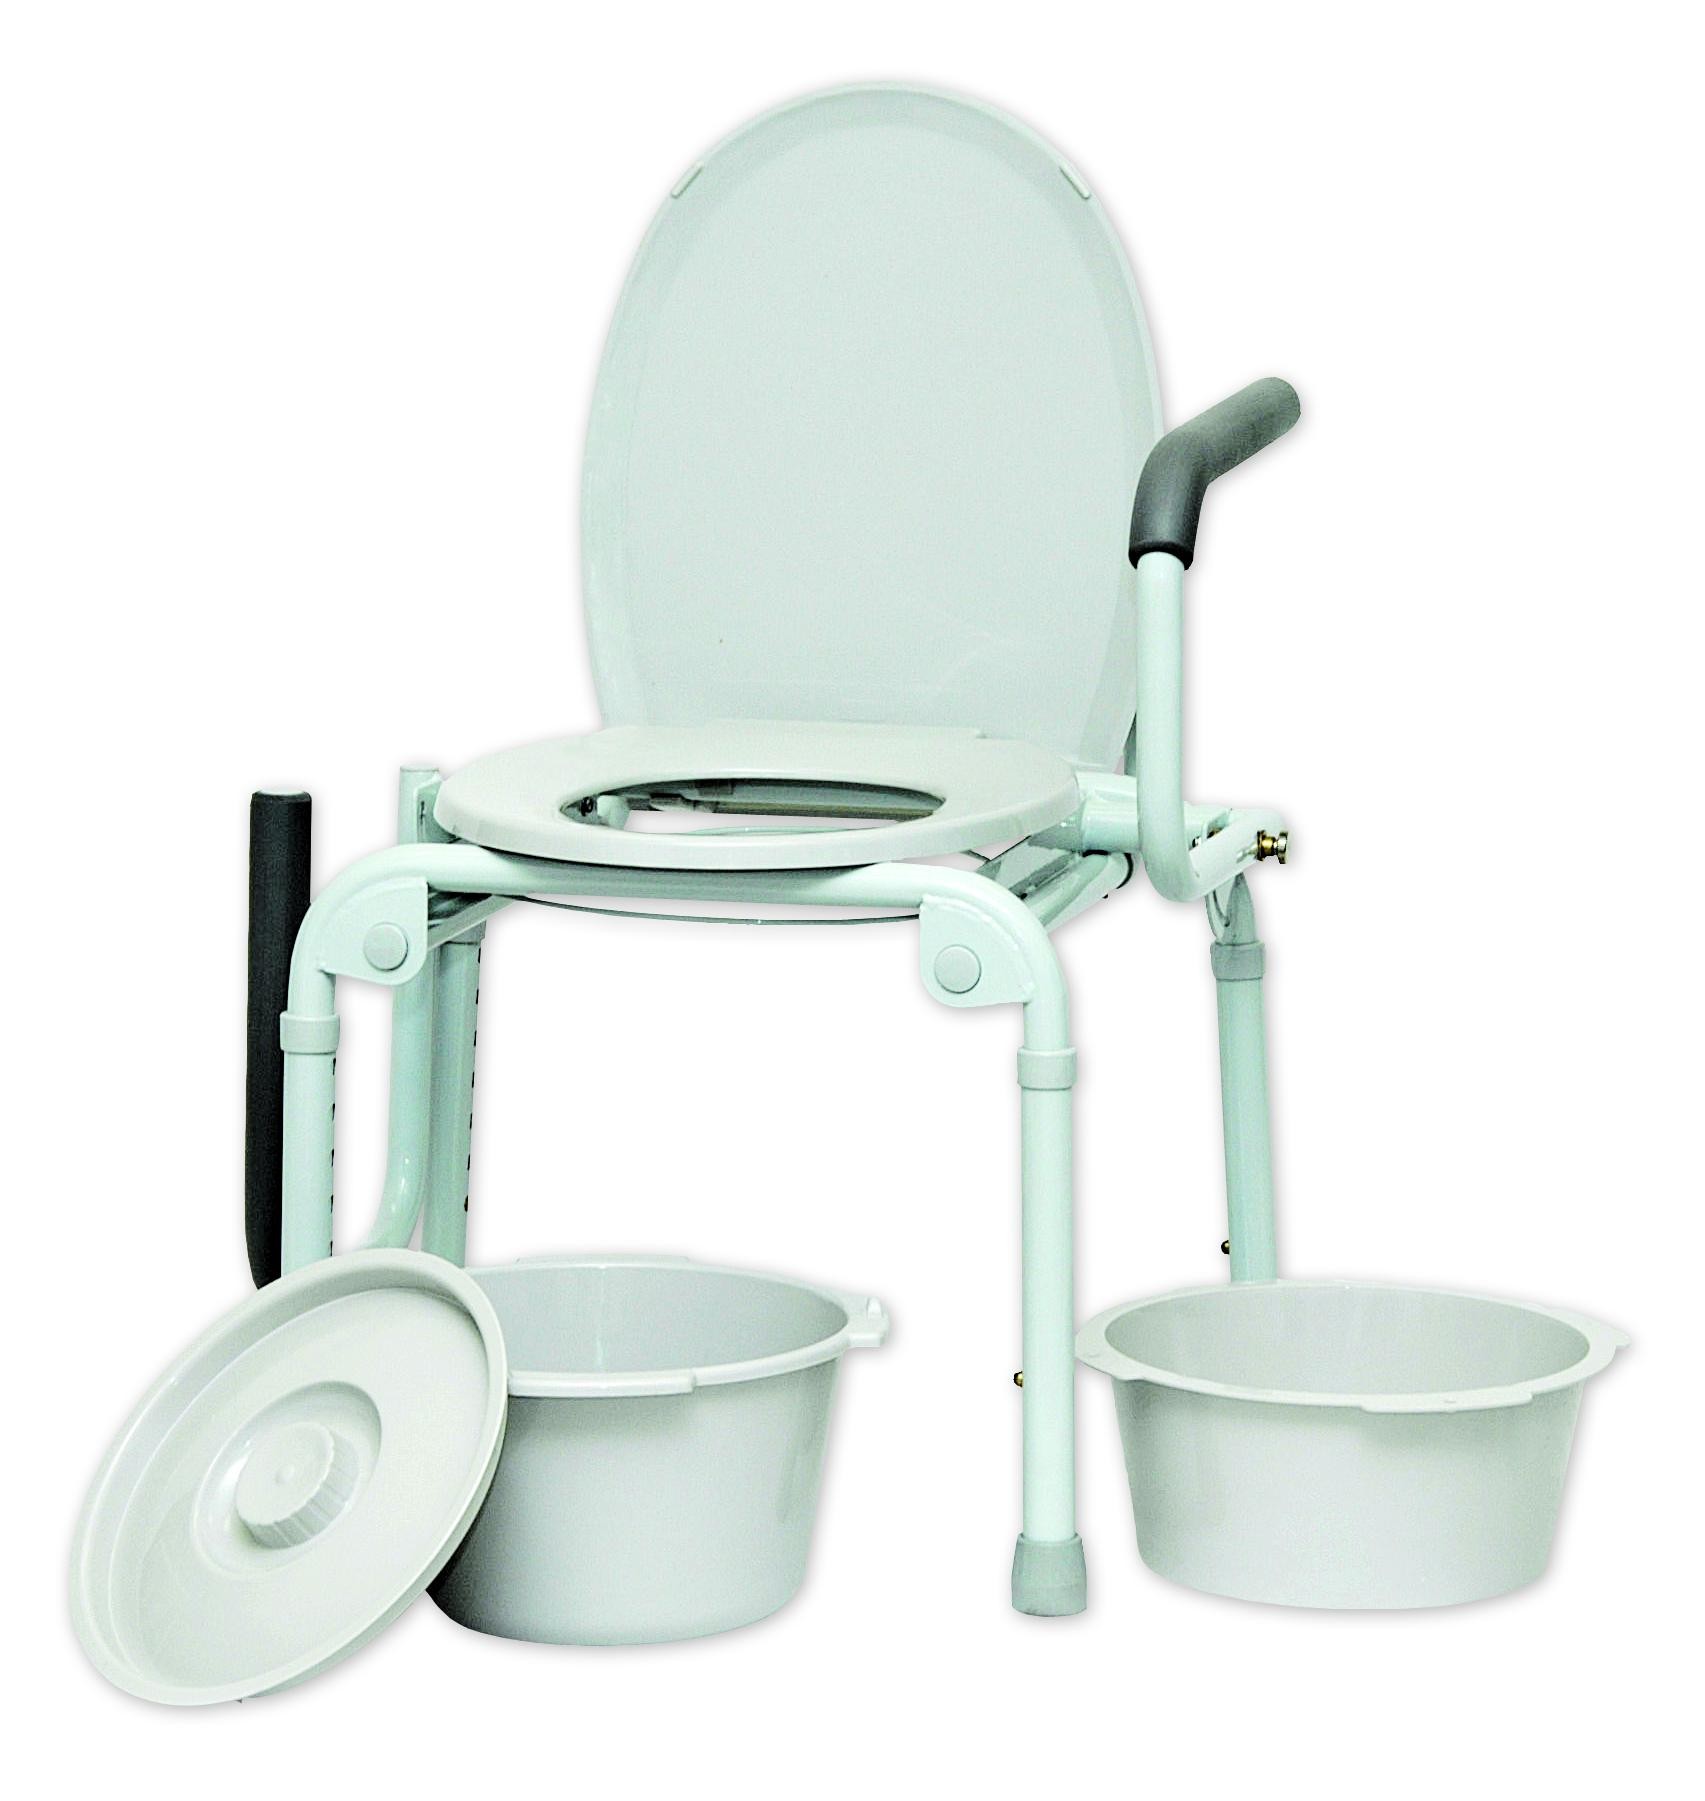 "Drop Arm Commode 14"" x 16"" Seat Dimension"